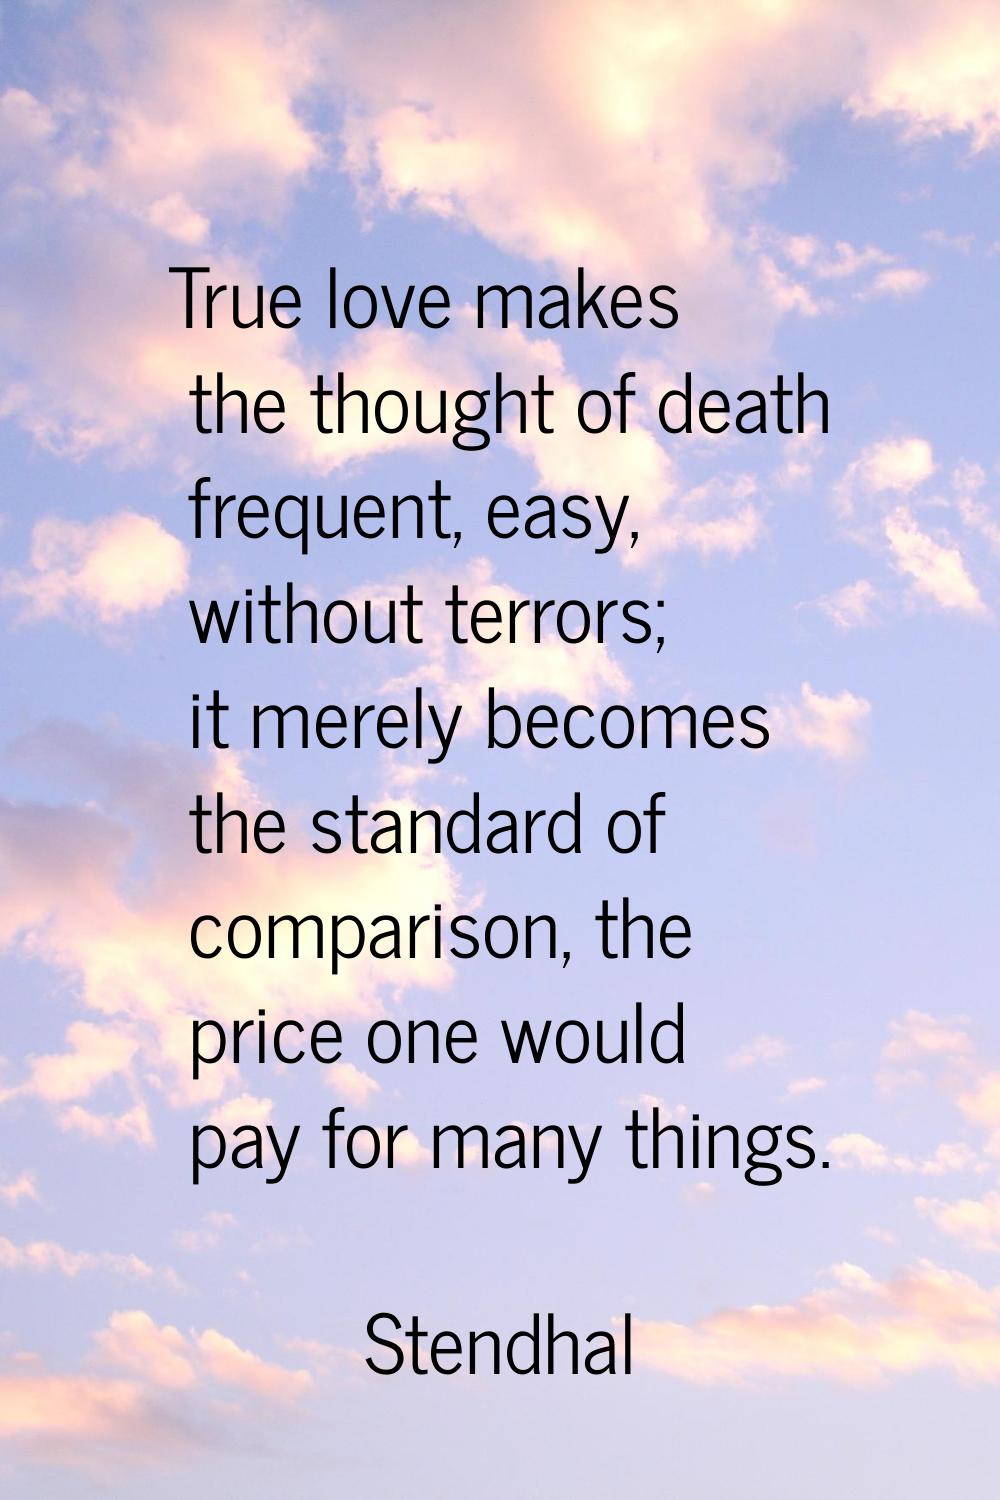 True love makes the thought of death frequent, easy, without terrors; it merely becomes the standar